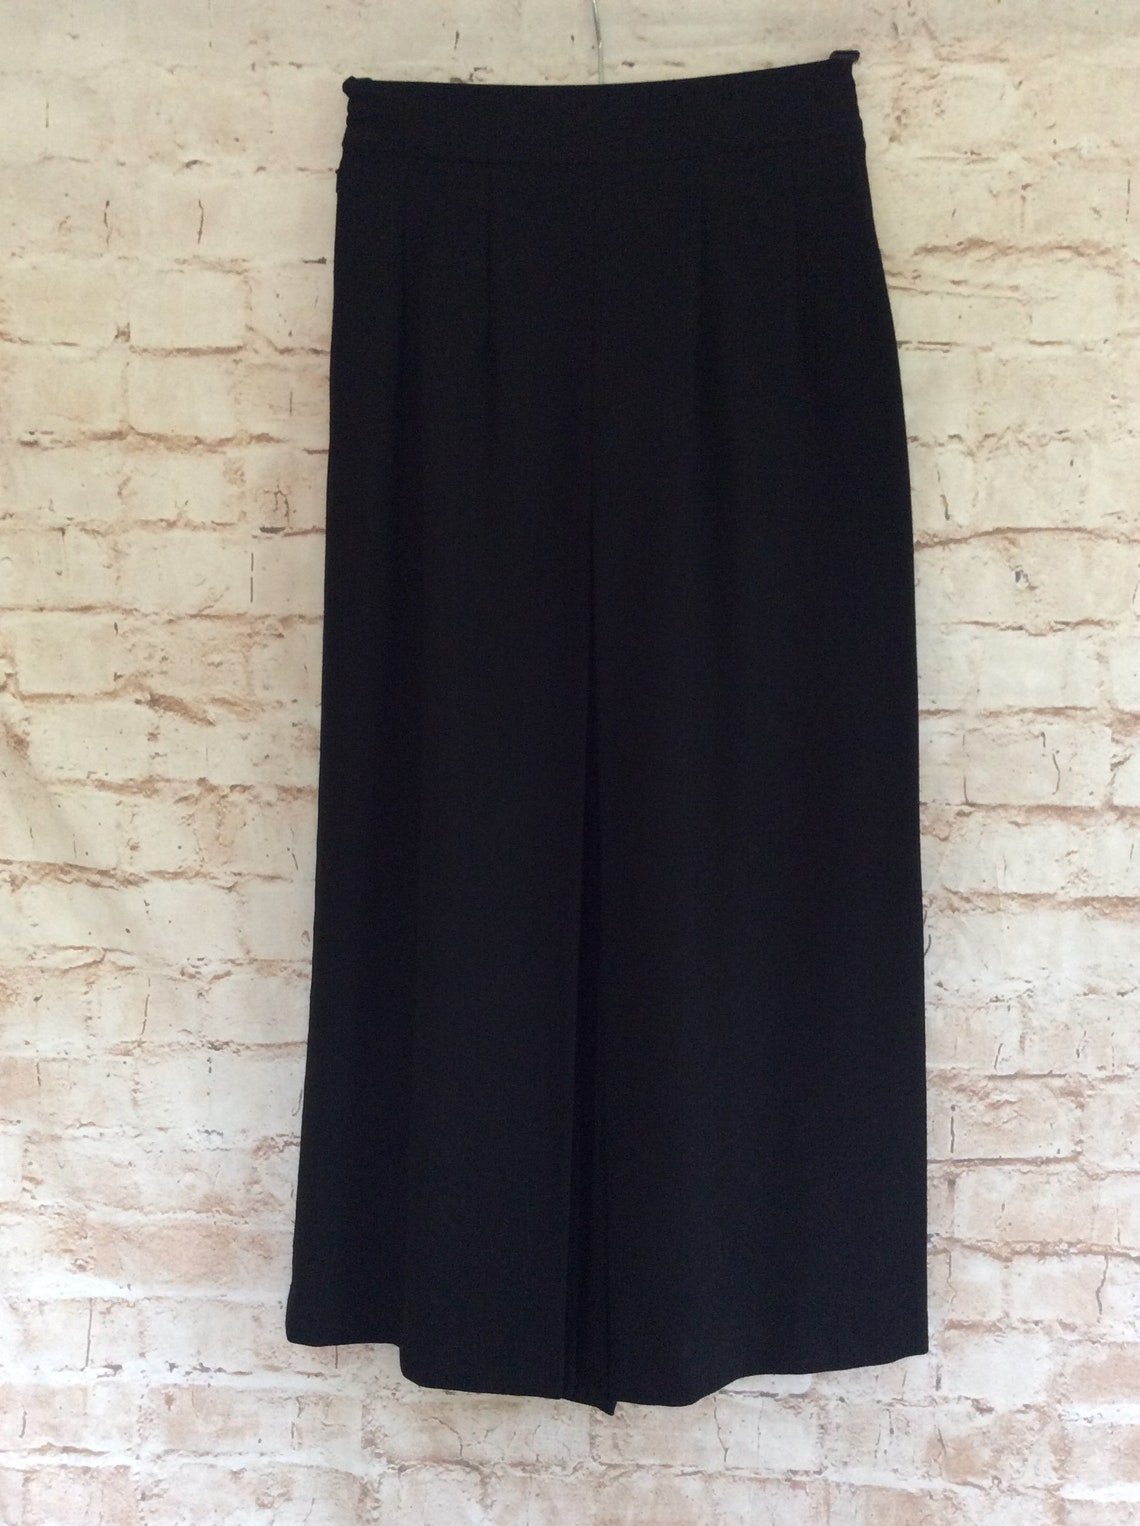 Vintage Culottes Divided Skirt In Black Wool Blend Fabric By | Etsy